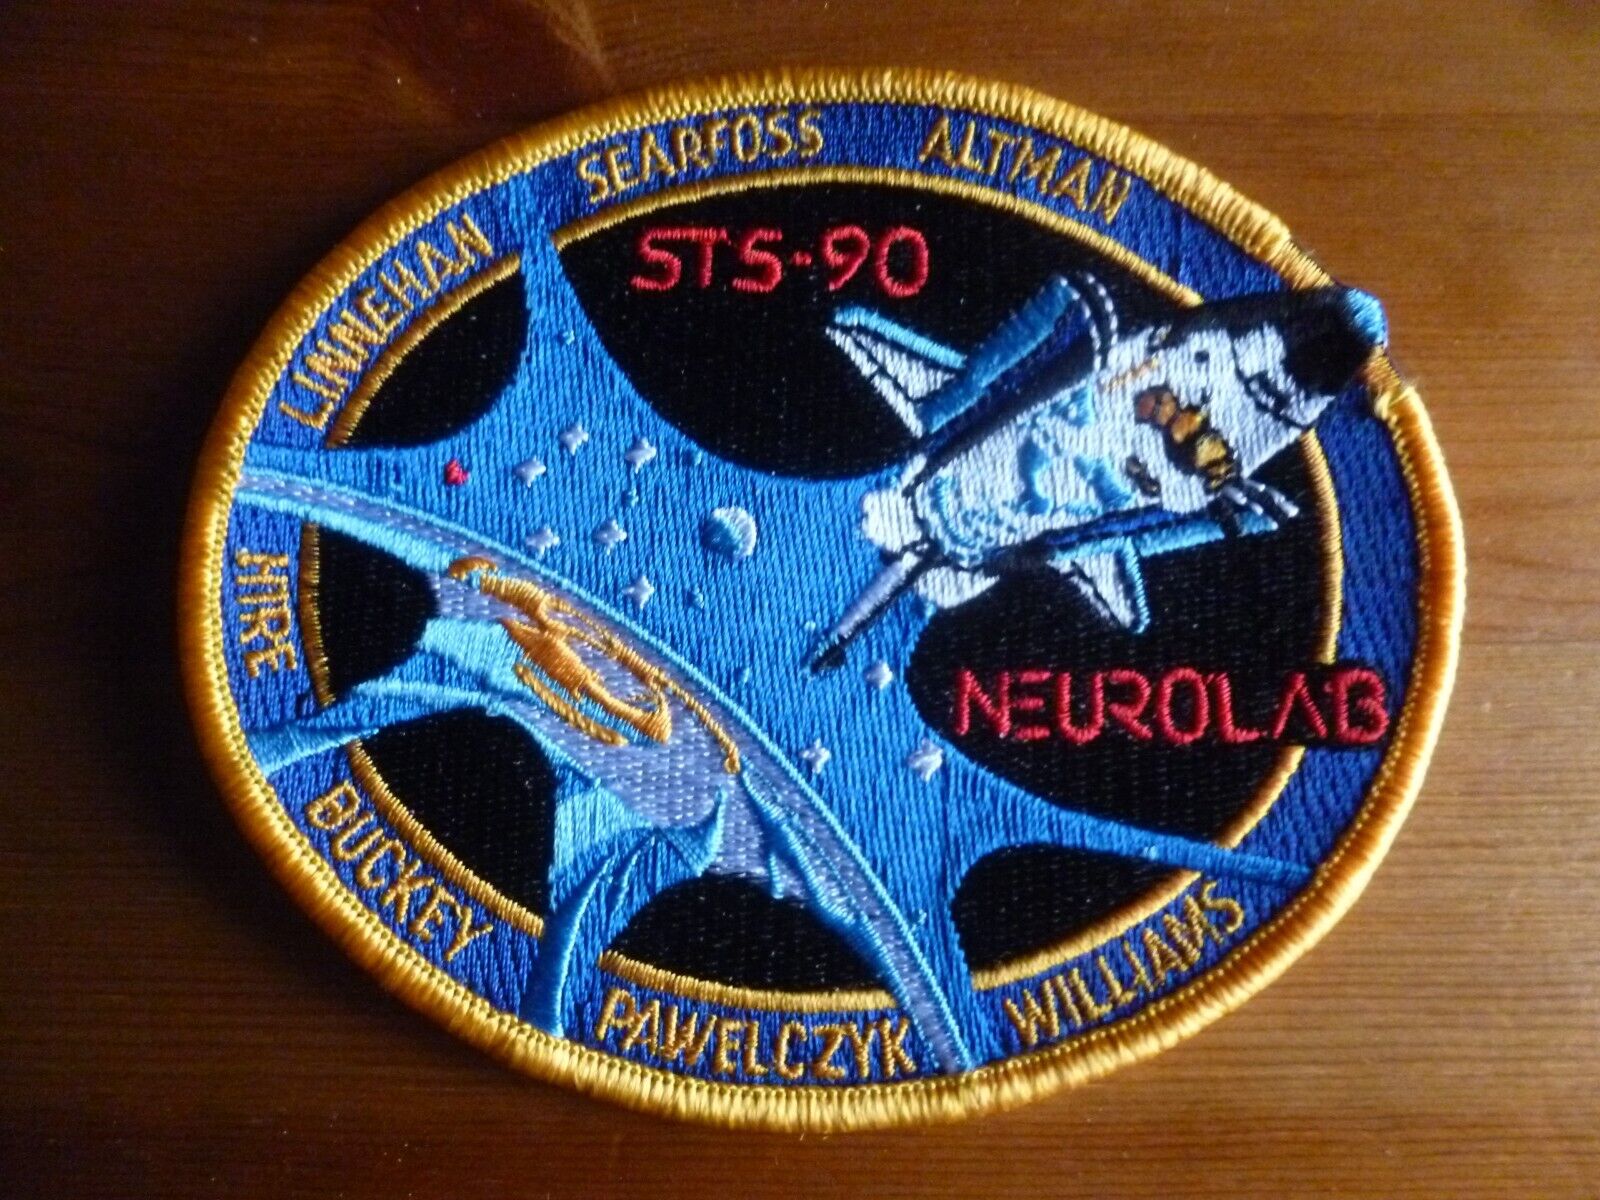 NASA PATCH STS-90 SPACE SHUTTLE Mission 1998 Columbia Neurolab USA